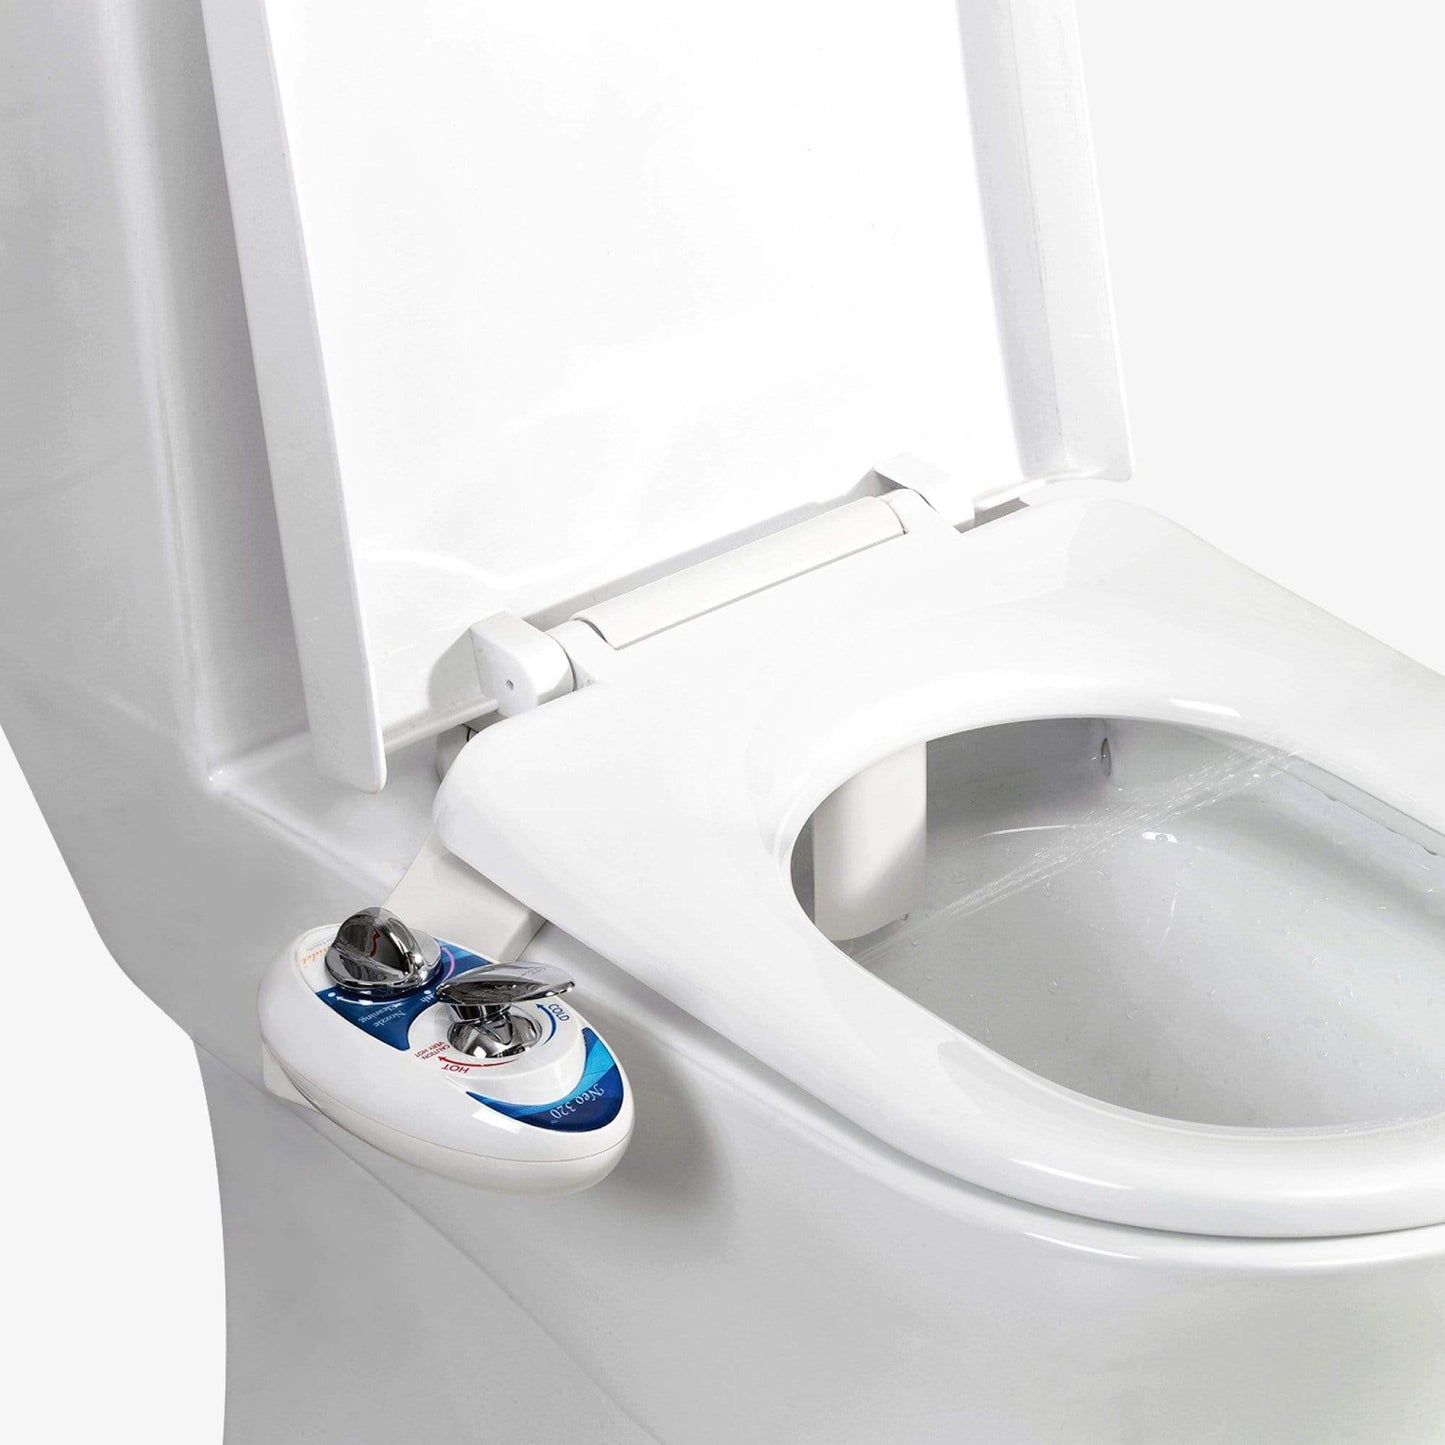 NEO 320 Blue installed on a toilet with water spraying from nozzles